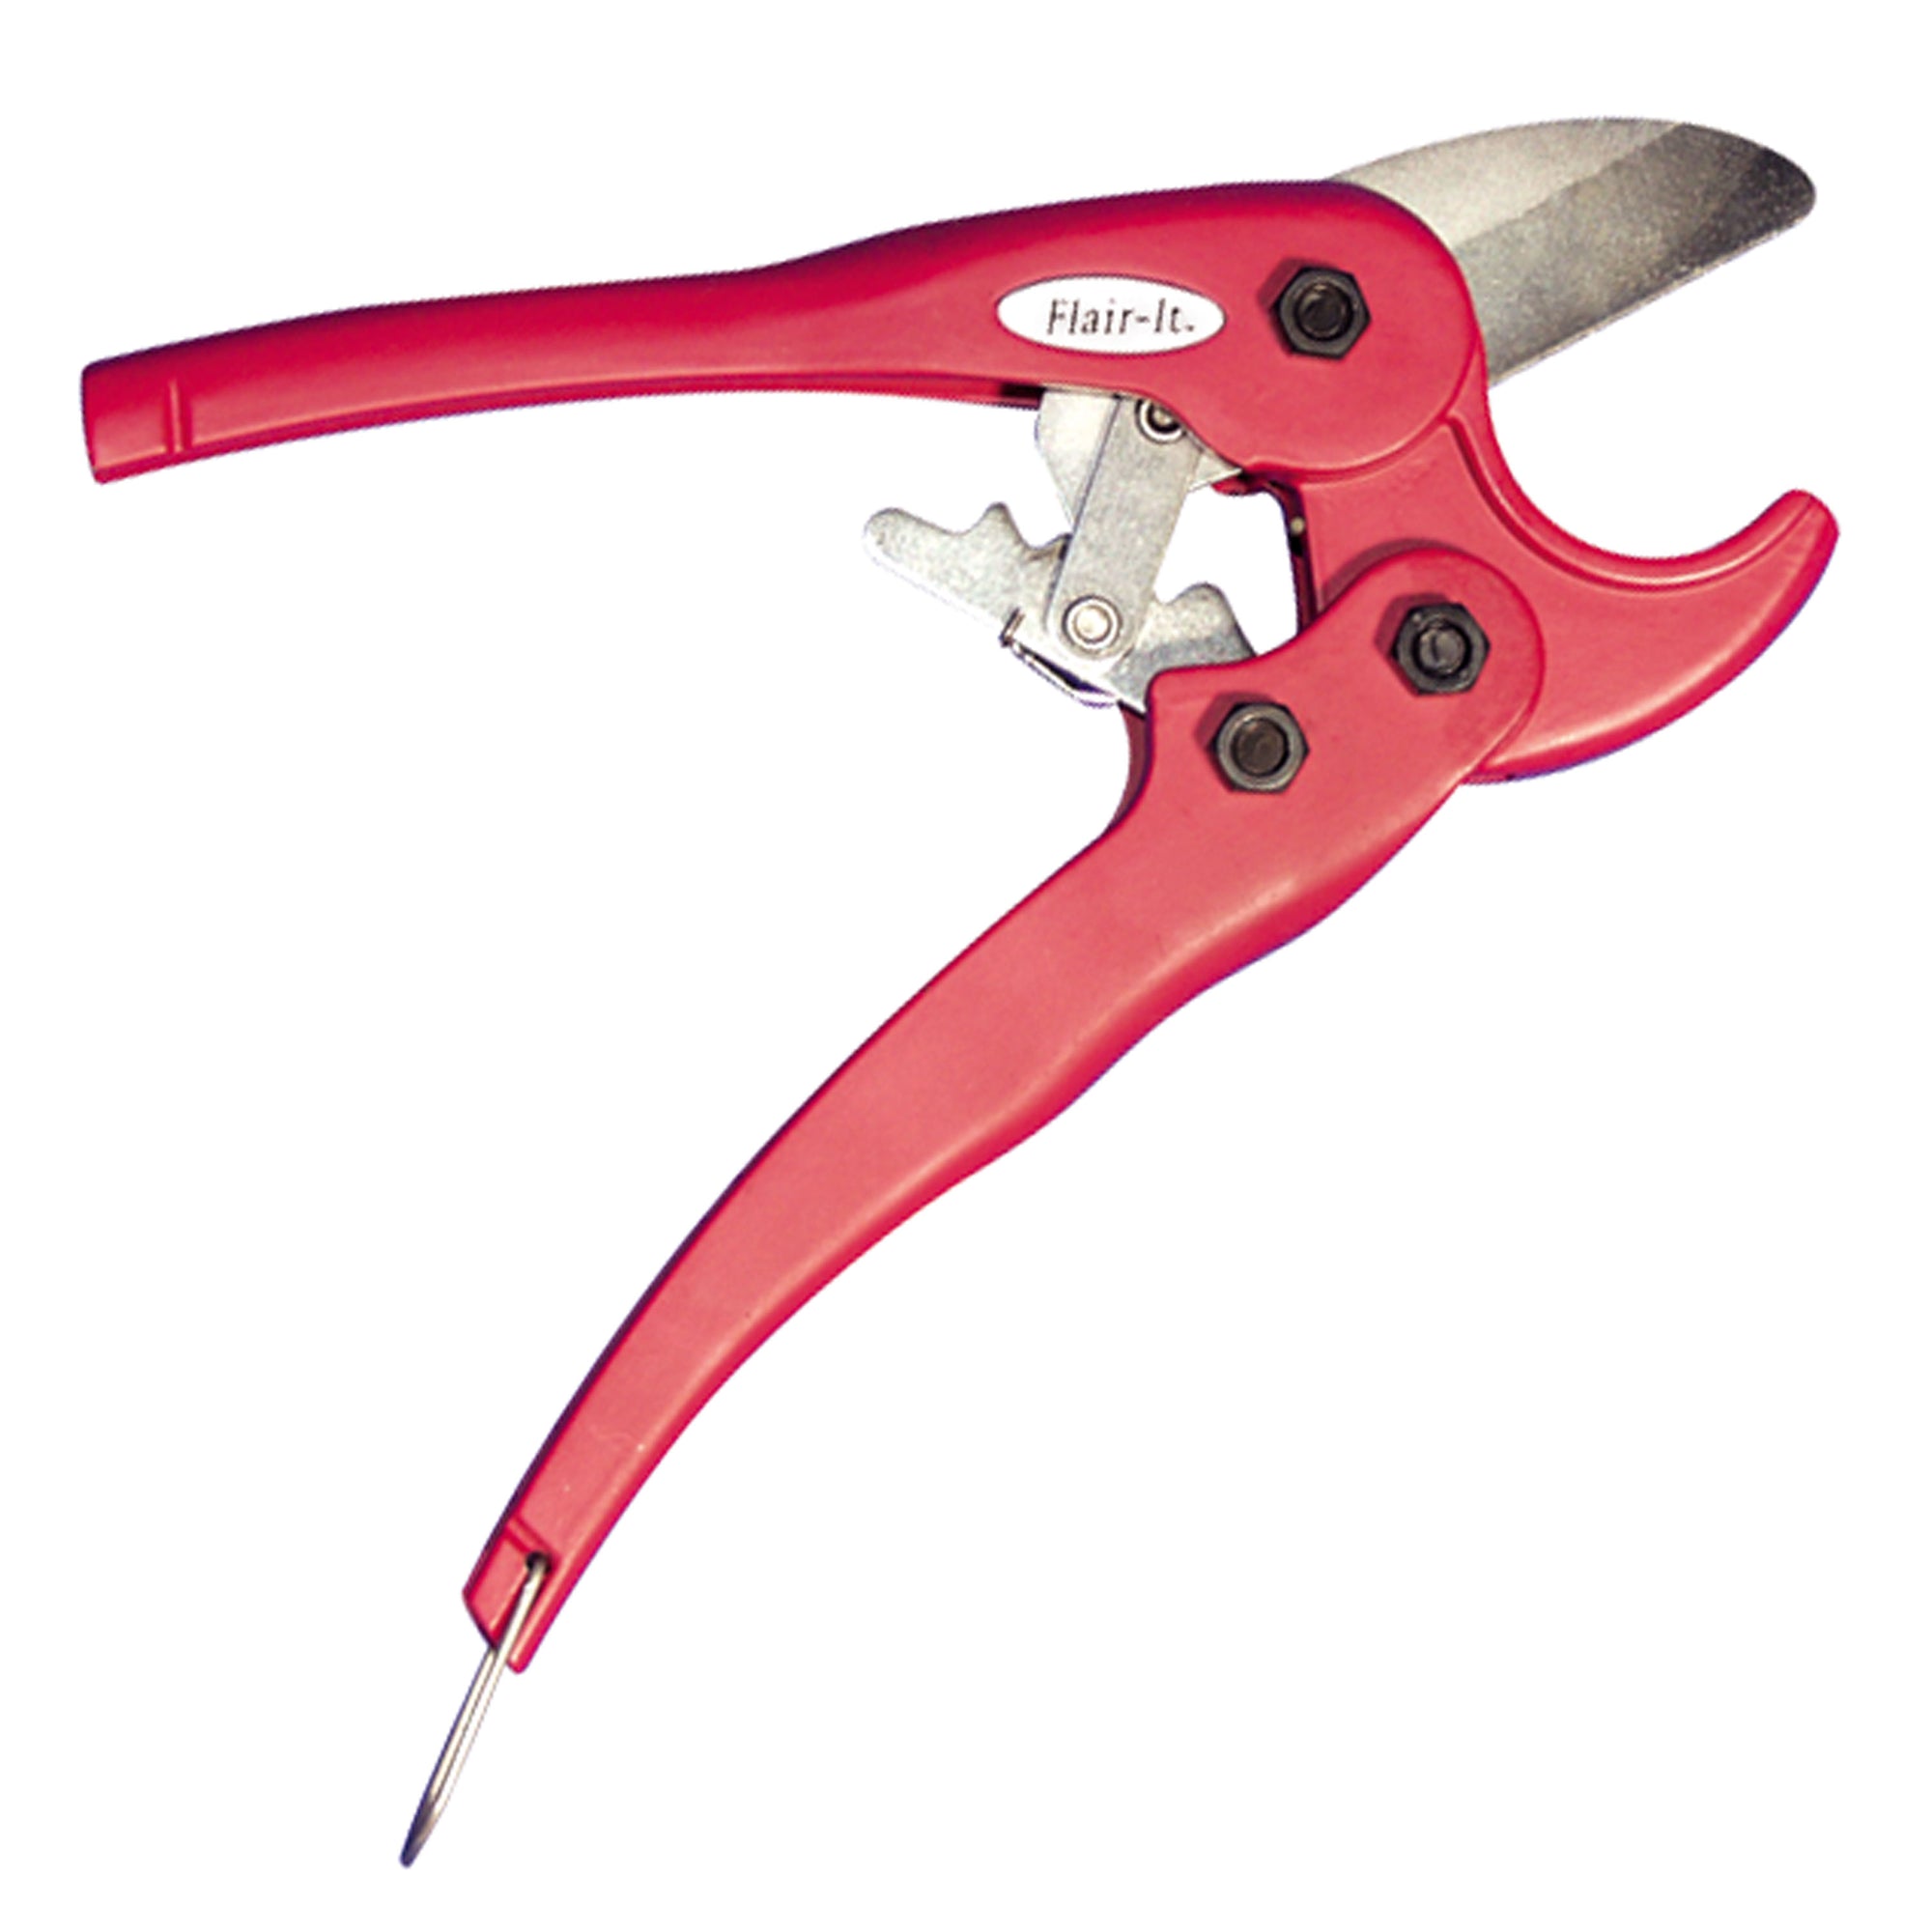 Flair-It 11175 Universal Pipe Cutter